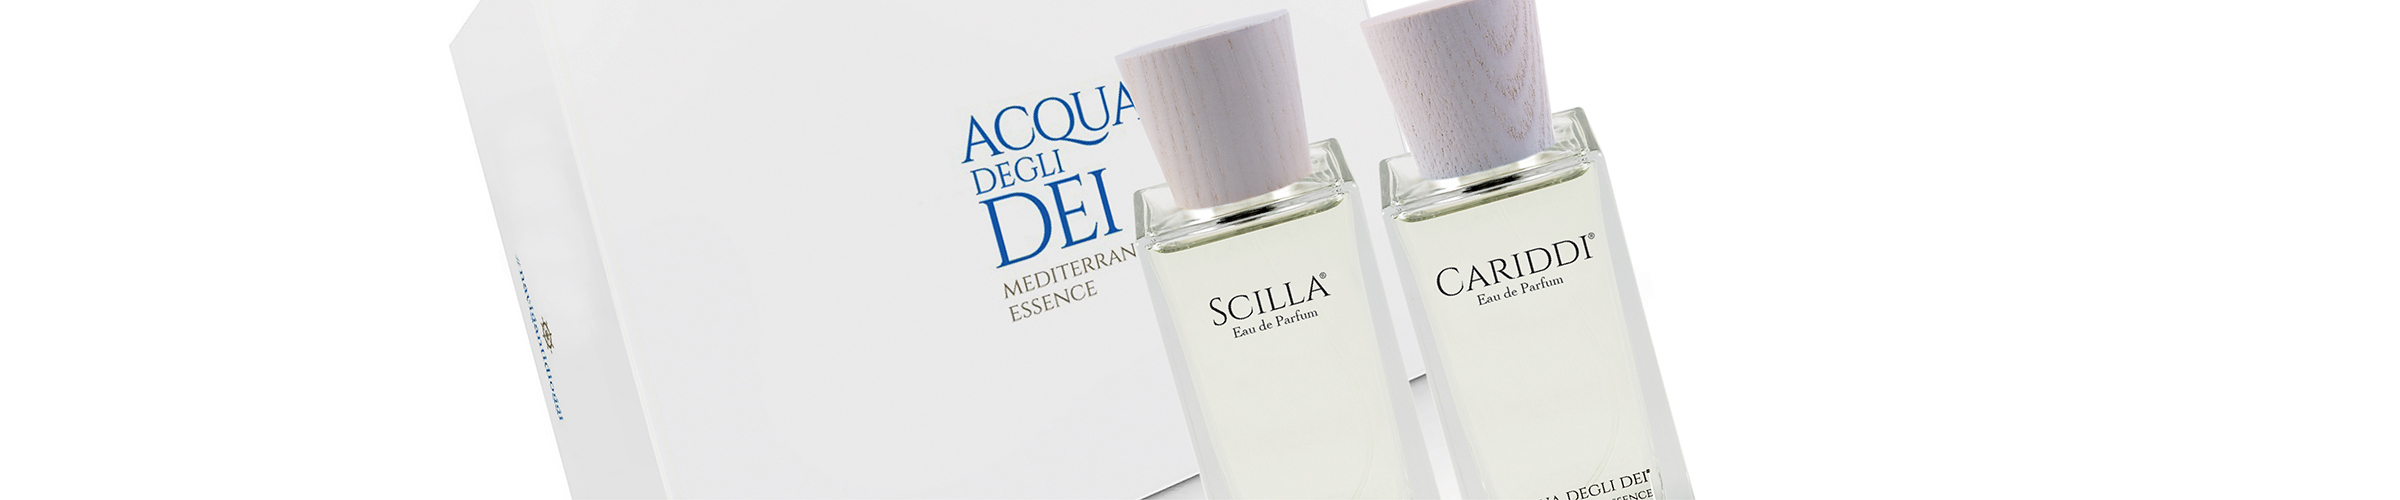 The two eau de parfum Scilla and Cariddi in the 30ml format, kept in the elegant gift box.